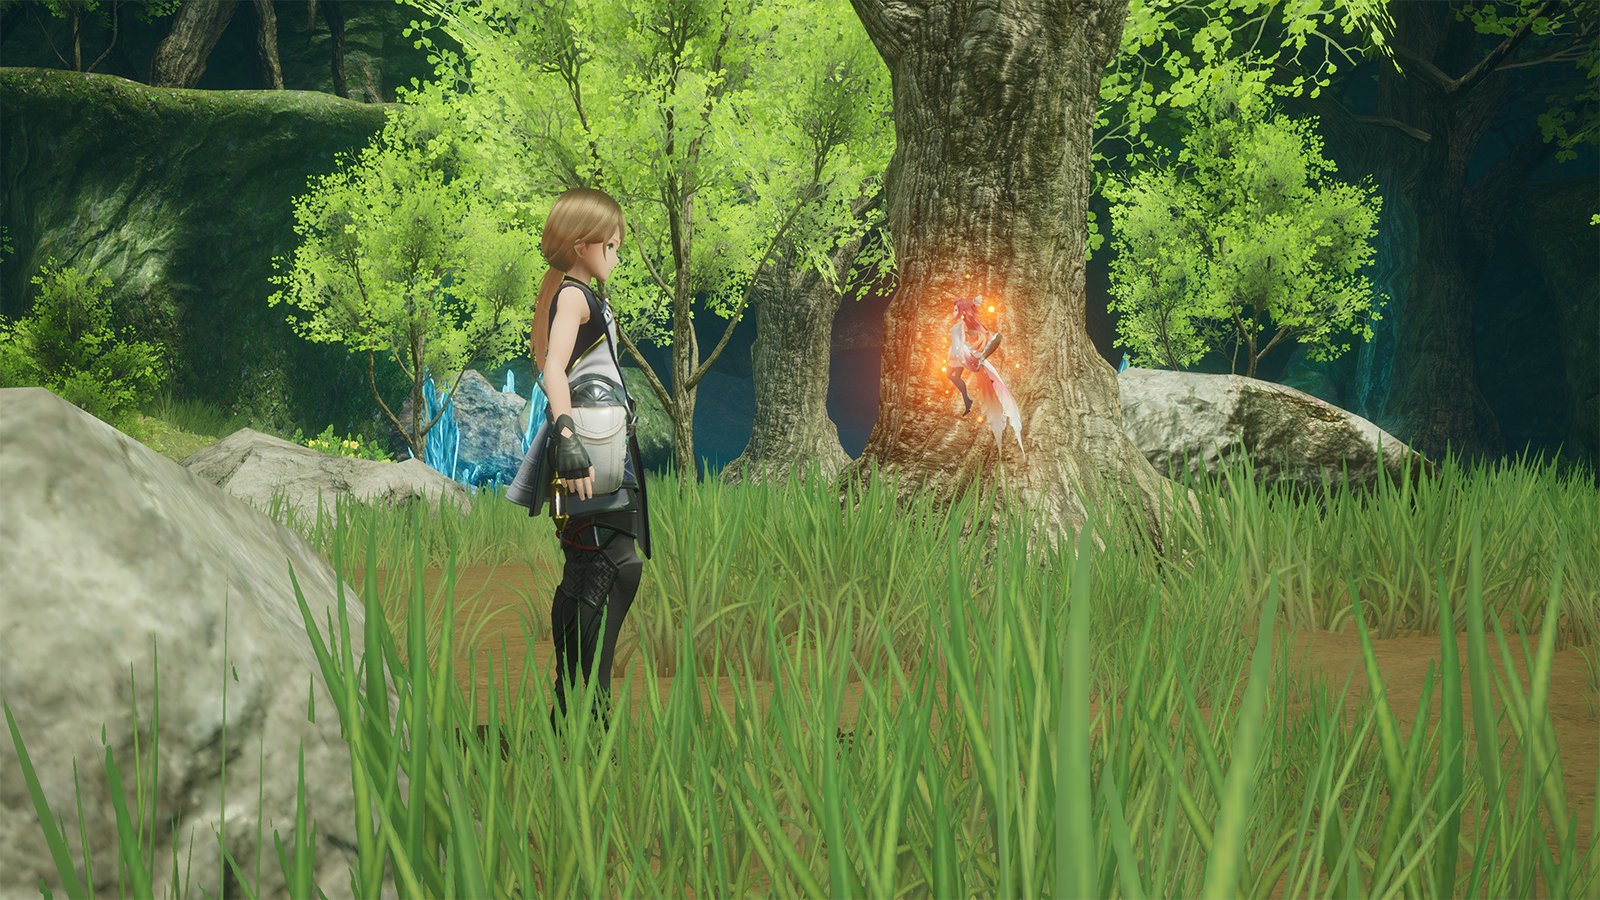 Screenshot from upcoming game Harvestella, by Square Enix.